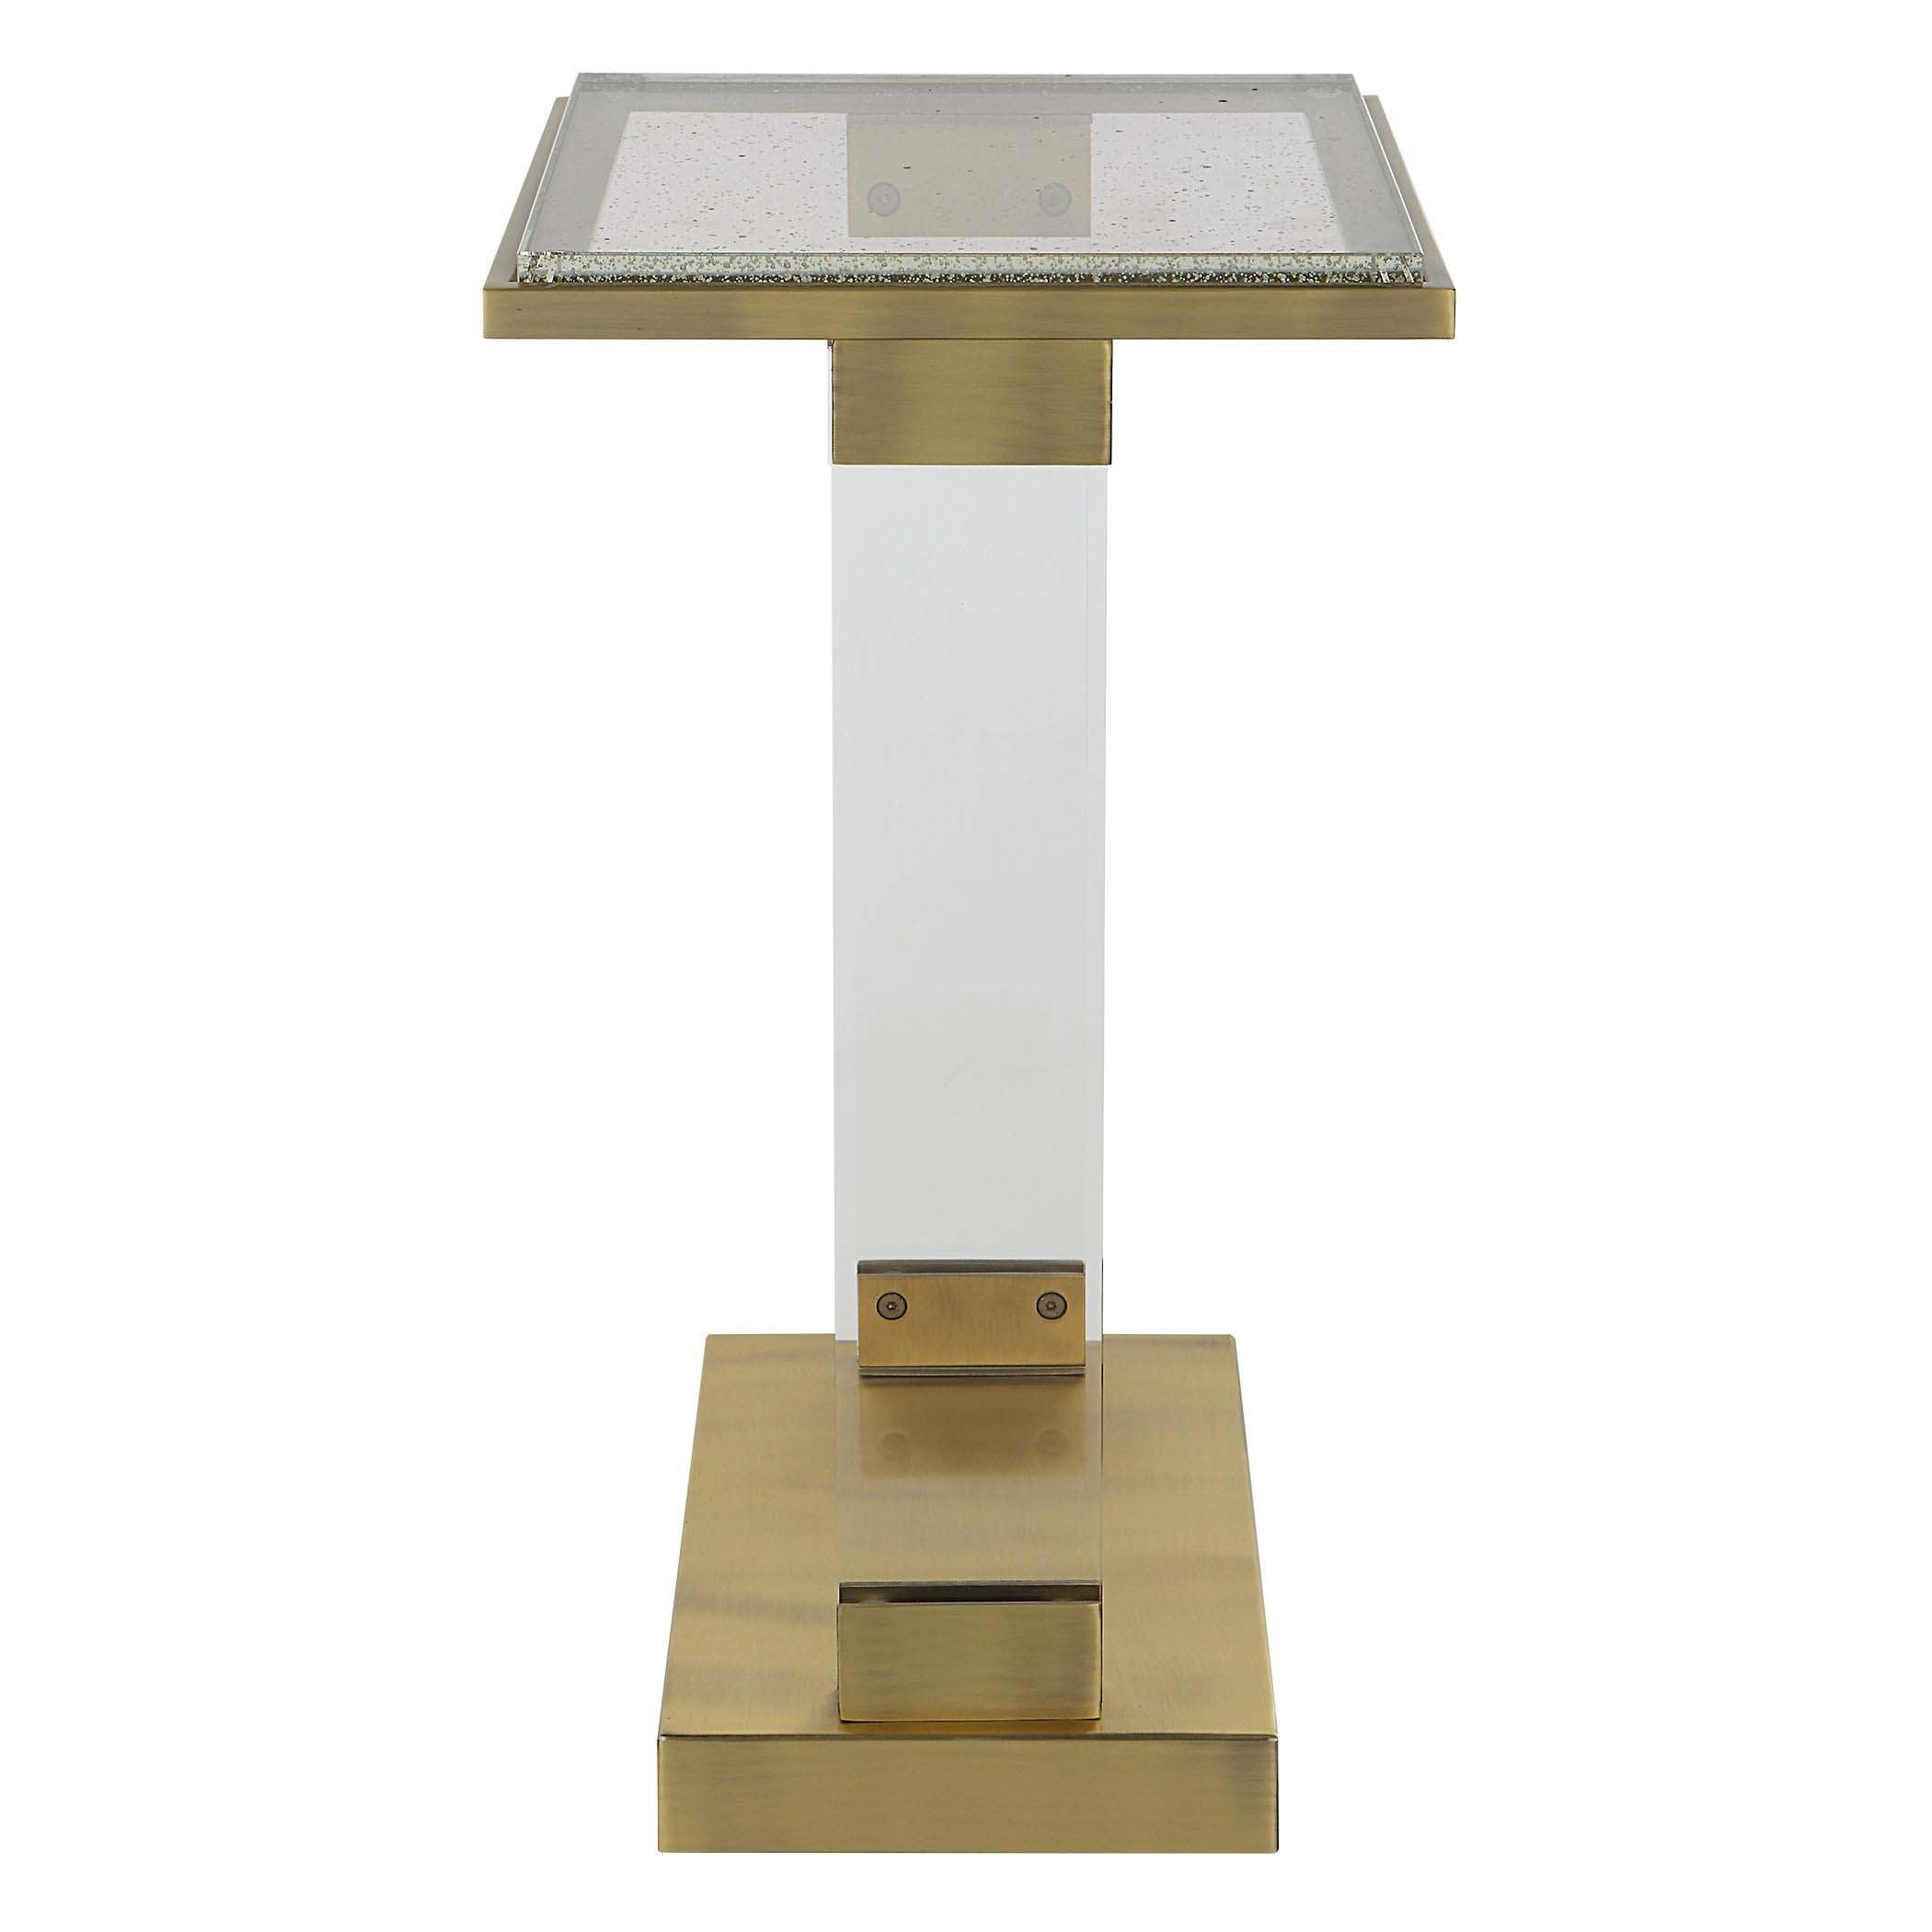 Uttermost Muse Seeded Glass Accent Table